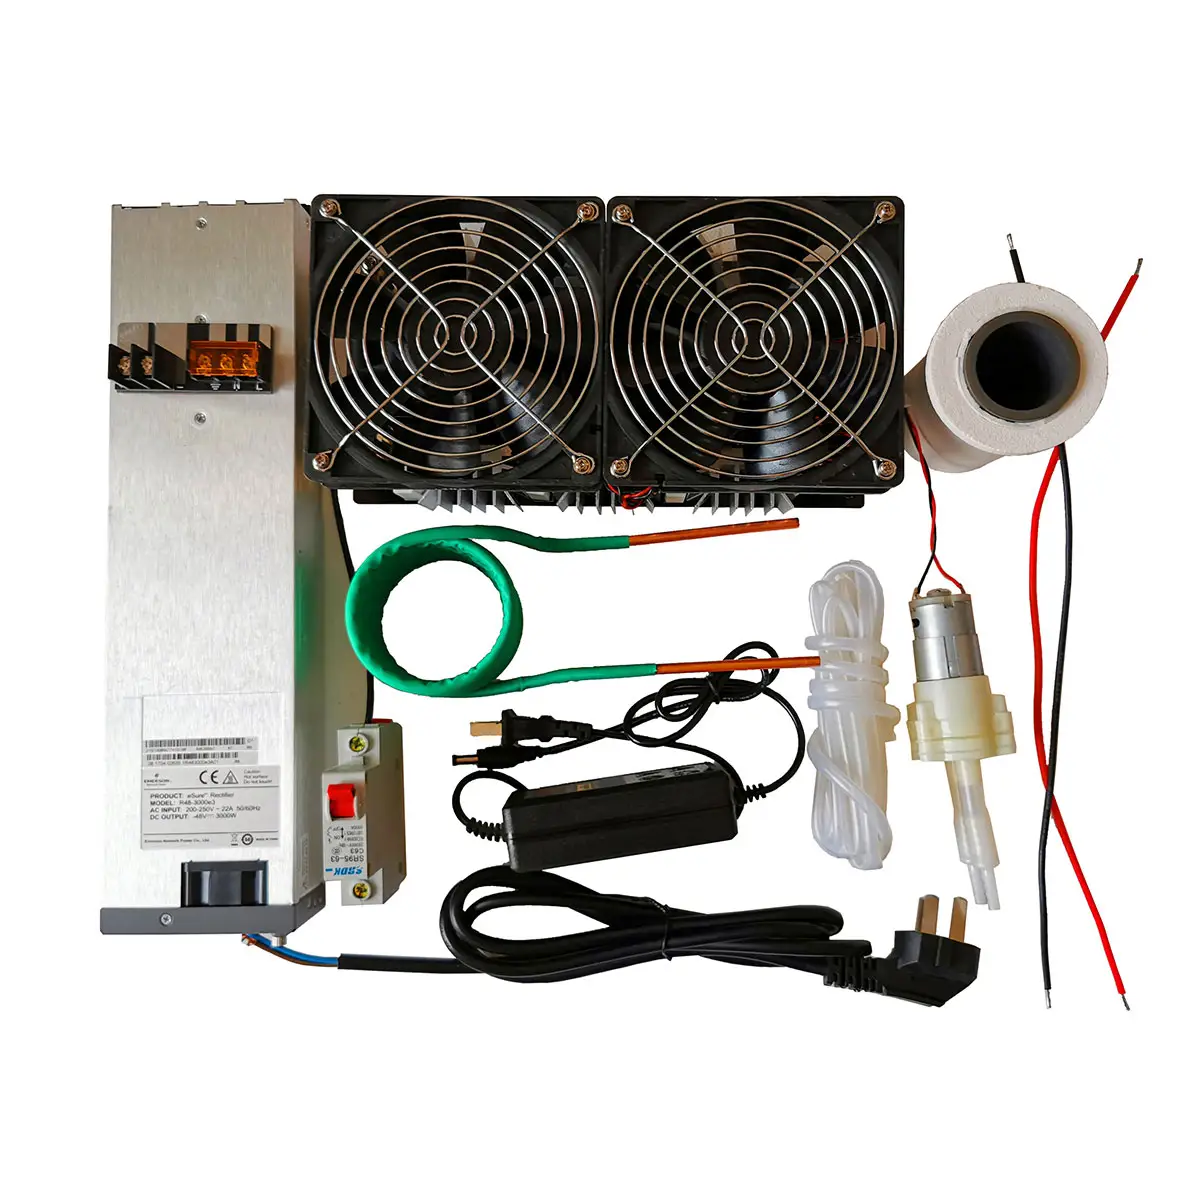 2500W Main Unit + Coil + Fan Power Supply + Crucible + Water Pump + DC48V Power Supply ZVS Induction Heater